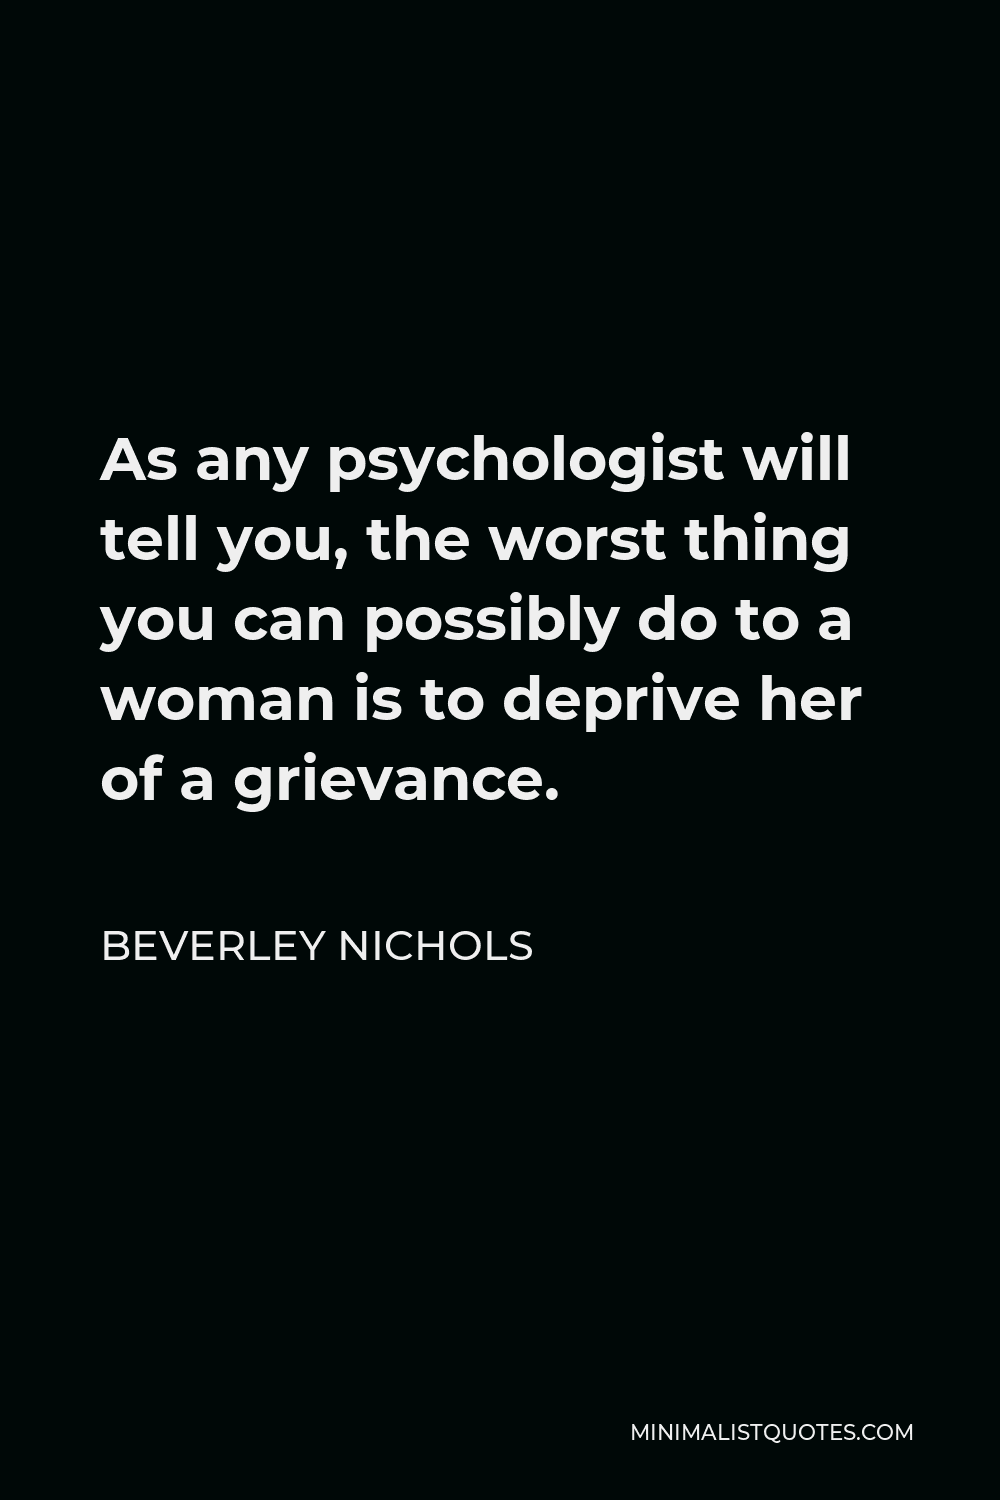 Beverley Nichols Quote - As any psychologist will tell you, the worst thing you can possibly do to a woman is to deprive her of a grievance.